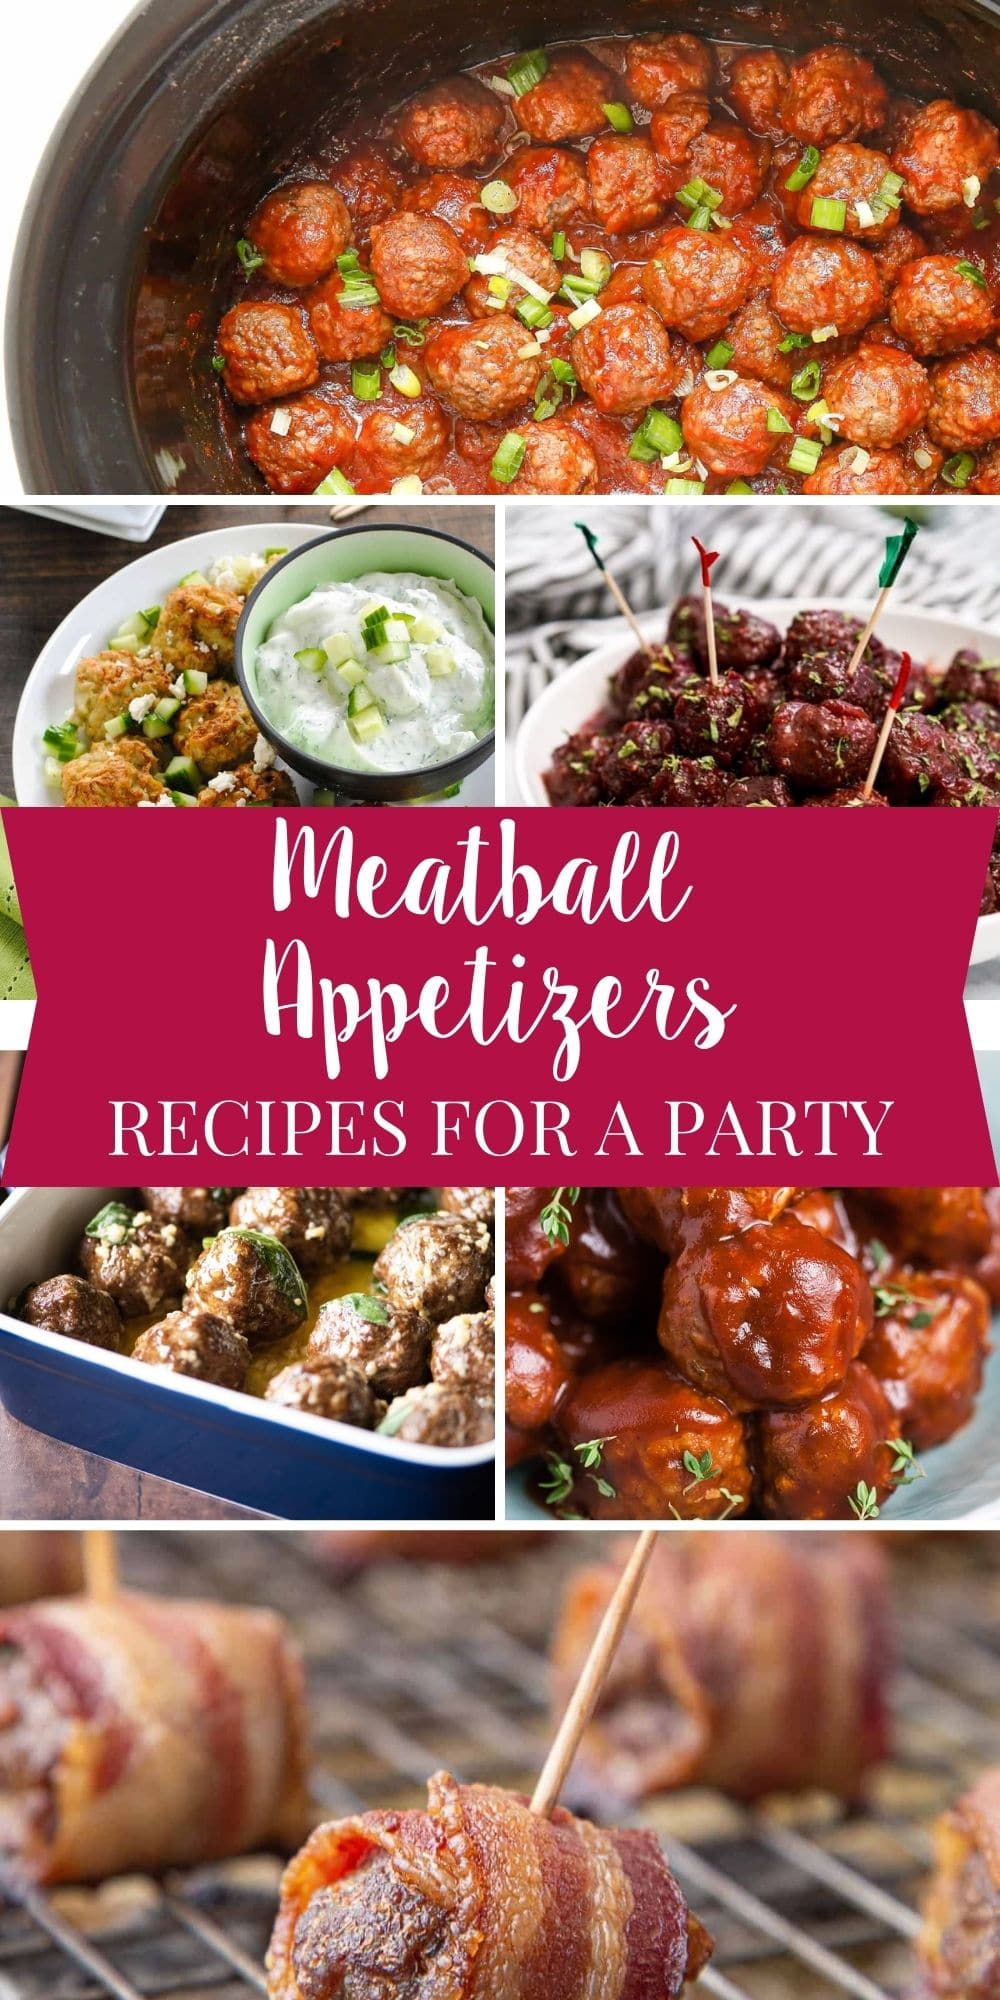 Meatball Appetizer Recipes for a Party